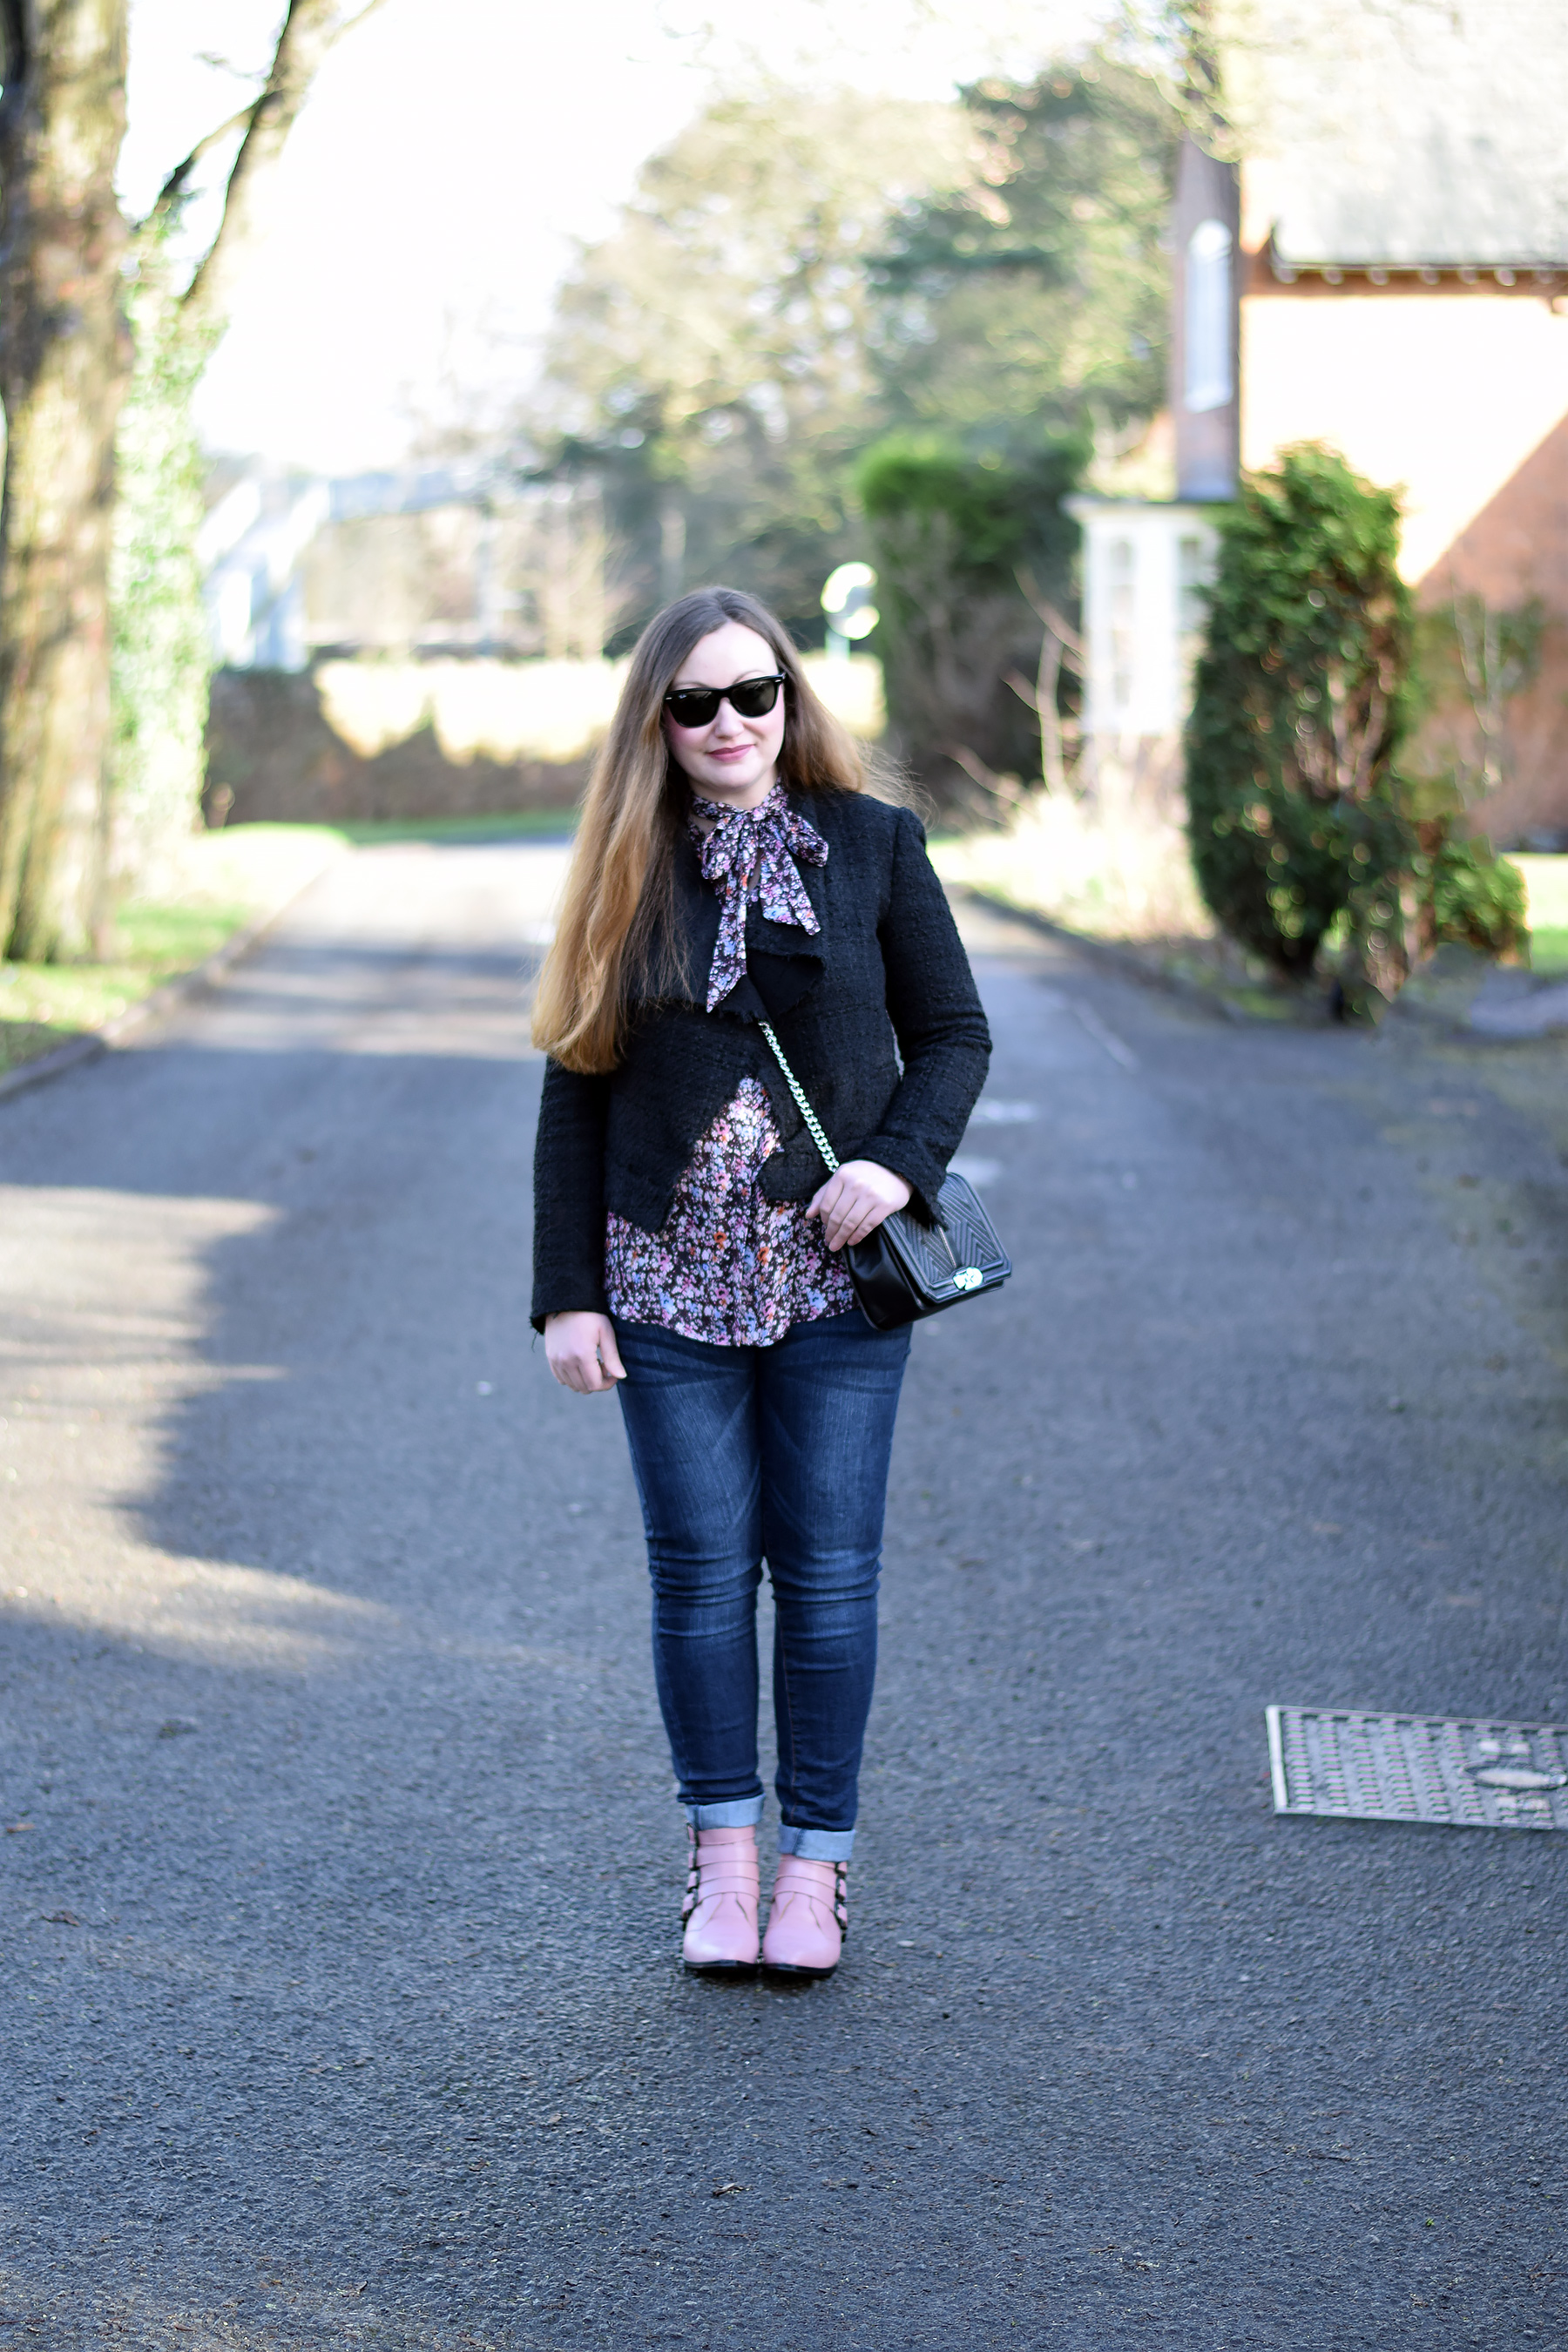 Zara Jacket and bow tie blouse with pink boots